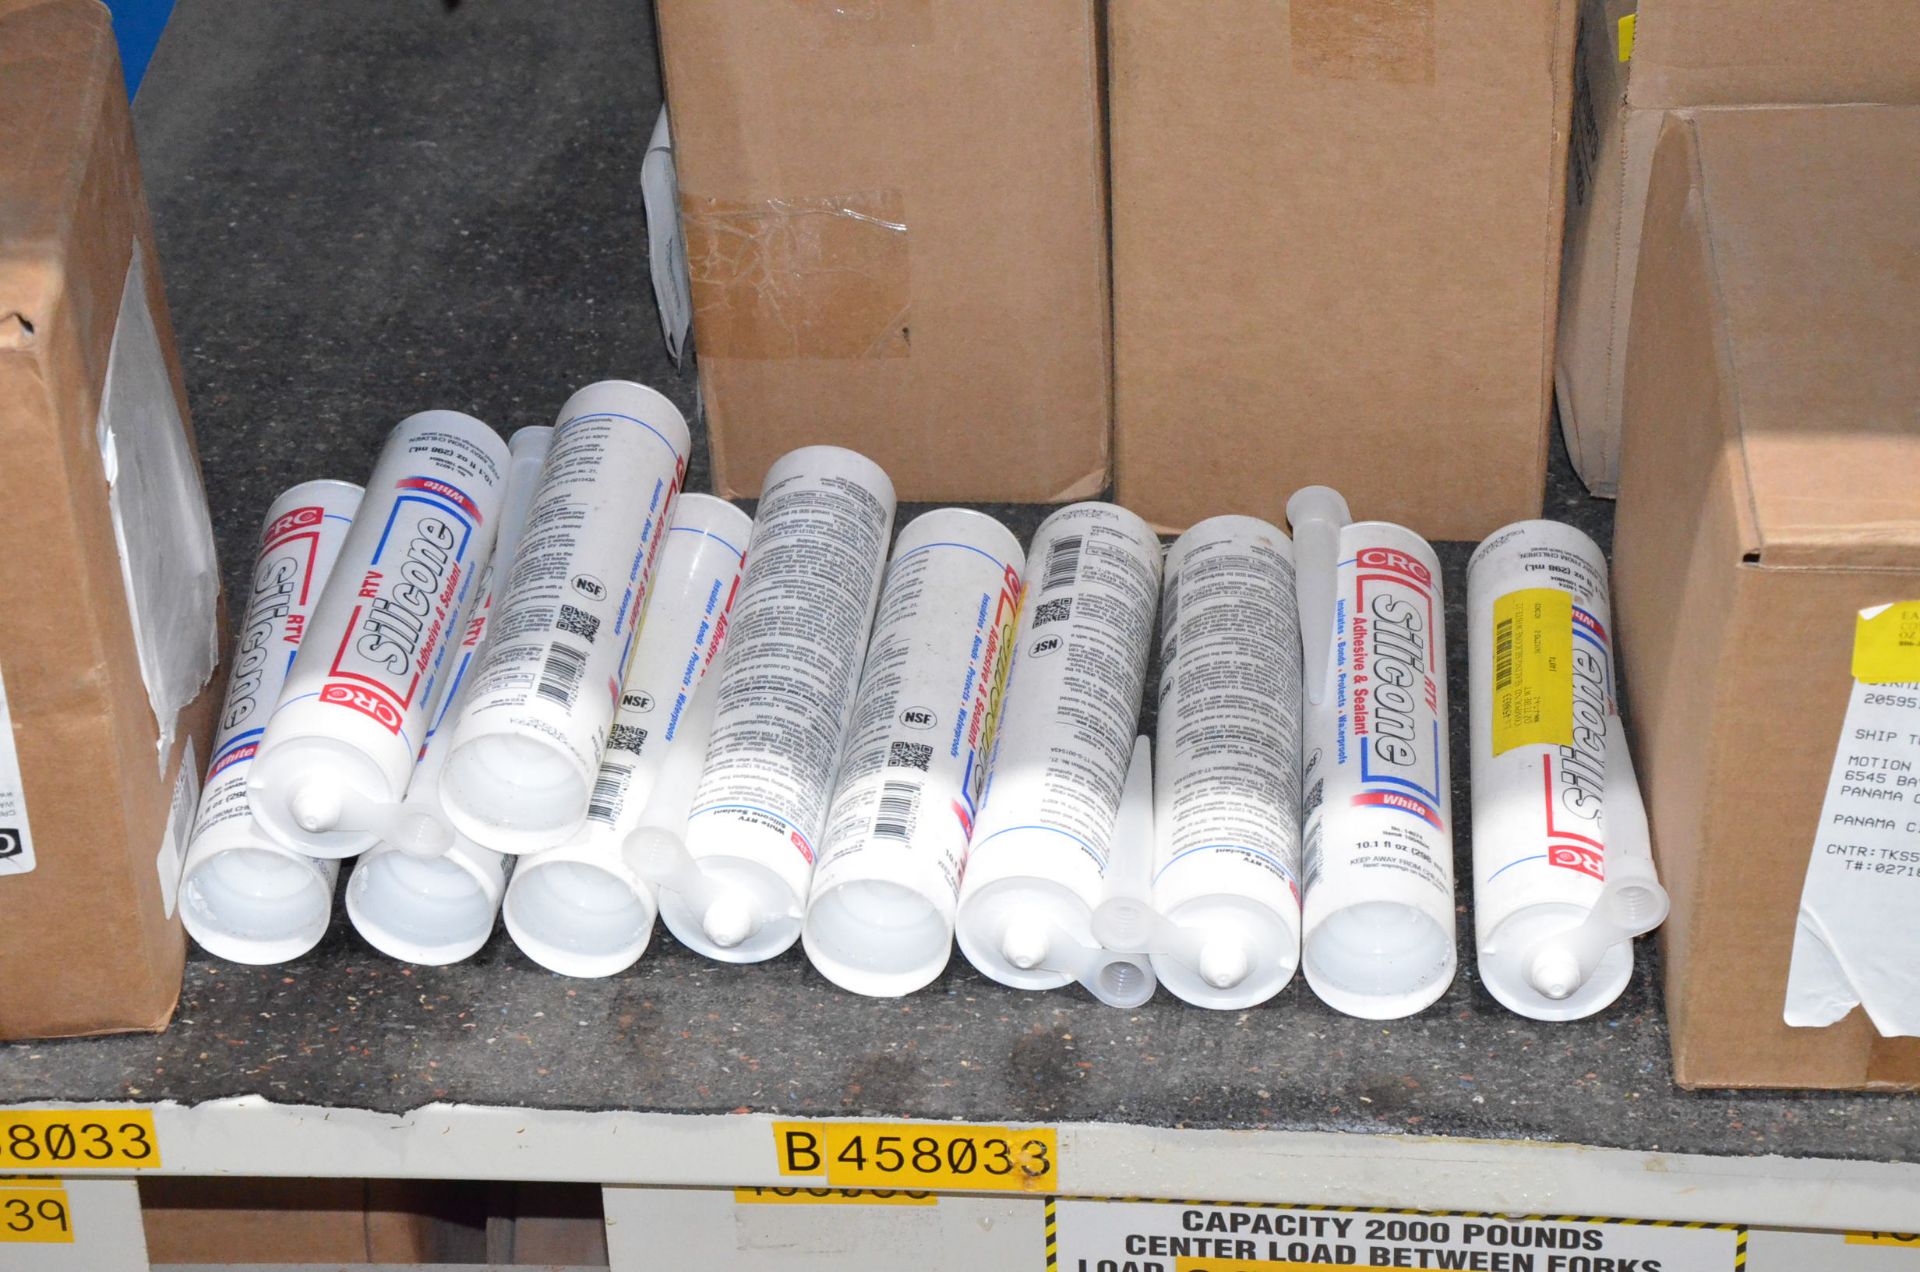 LOT/ CONTENTS OF SHELF - CHESTERTON PUMP TEFLON-CARBON REINFORCED SPECIALTY PACKING MATERIAL, - Image 6 of 7